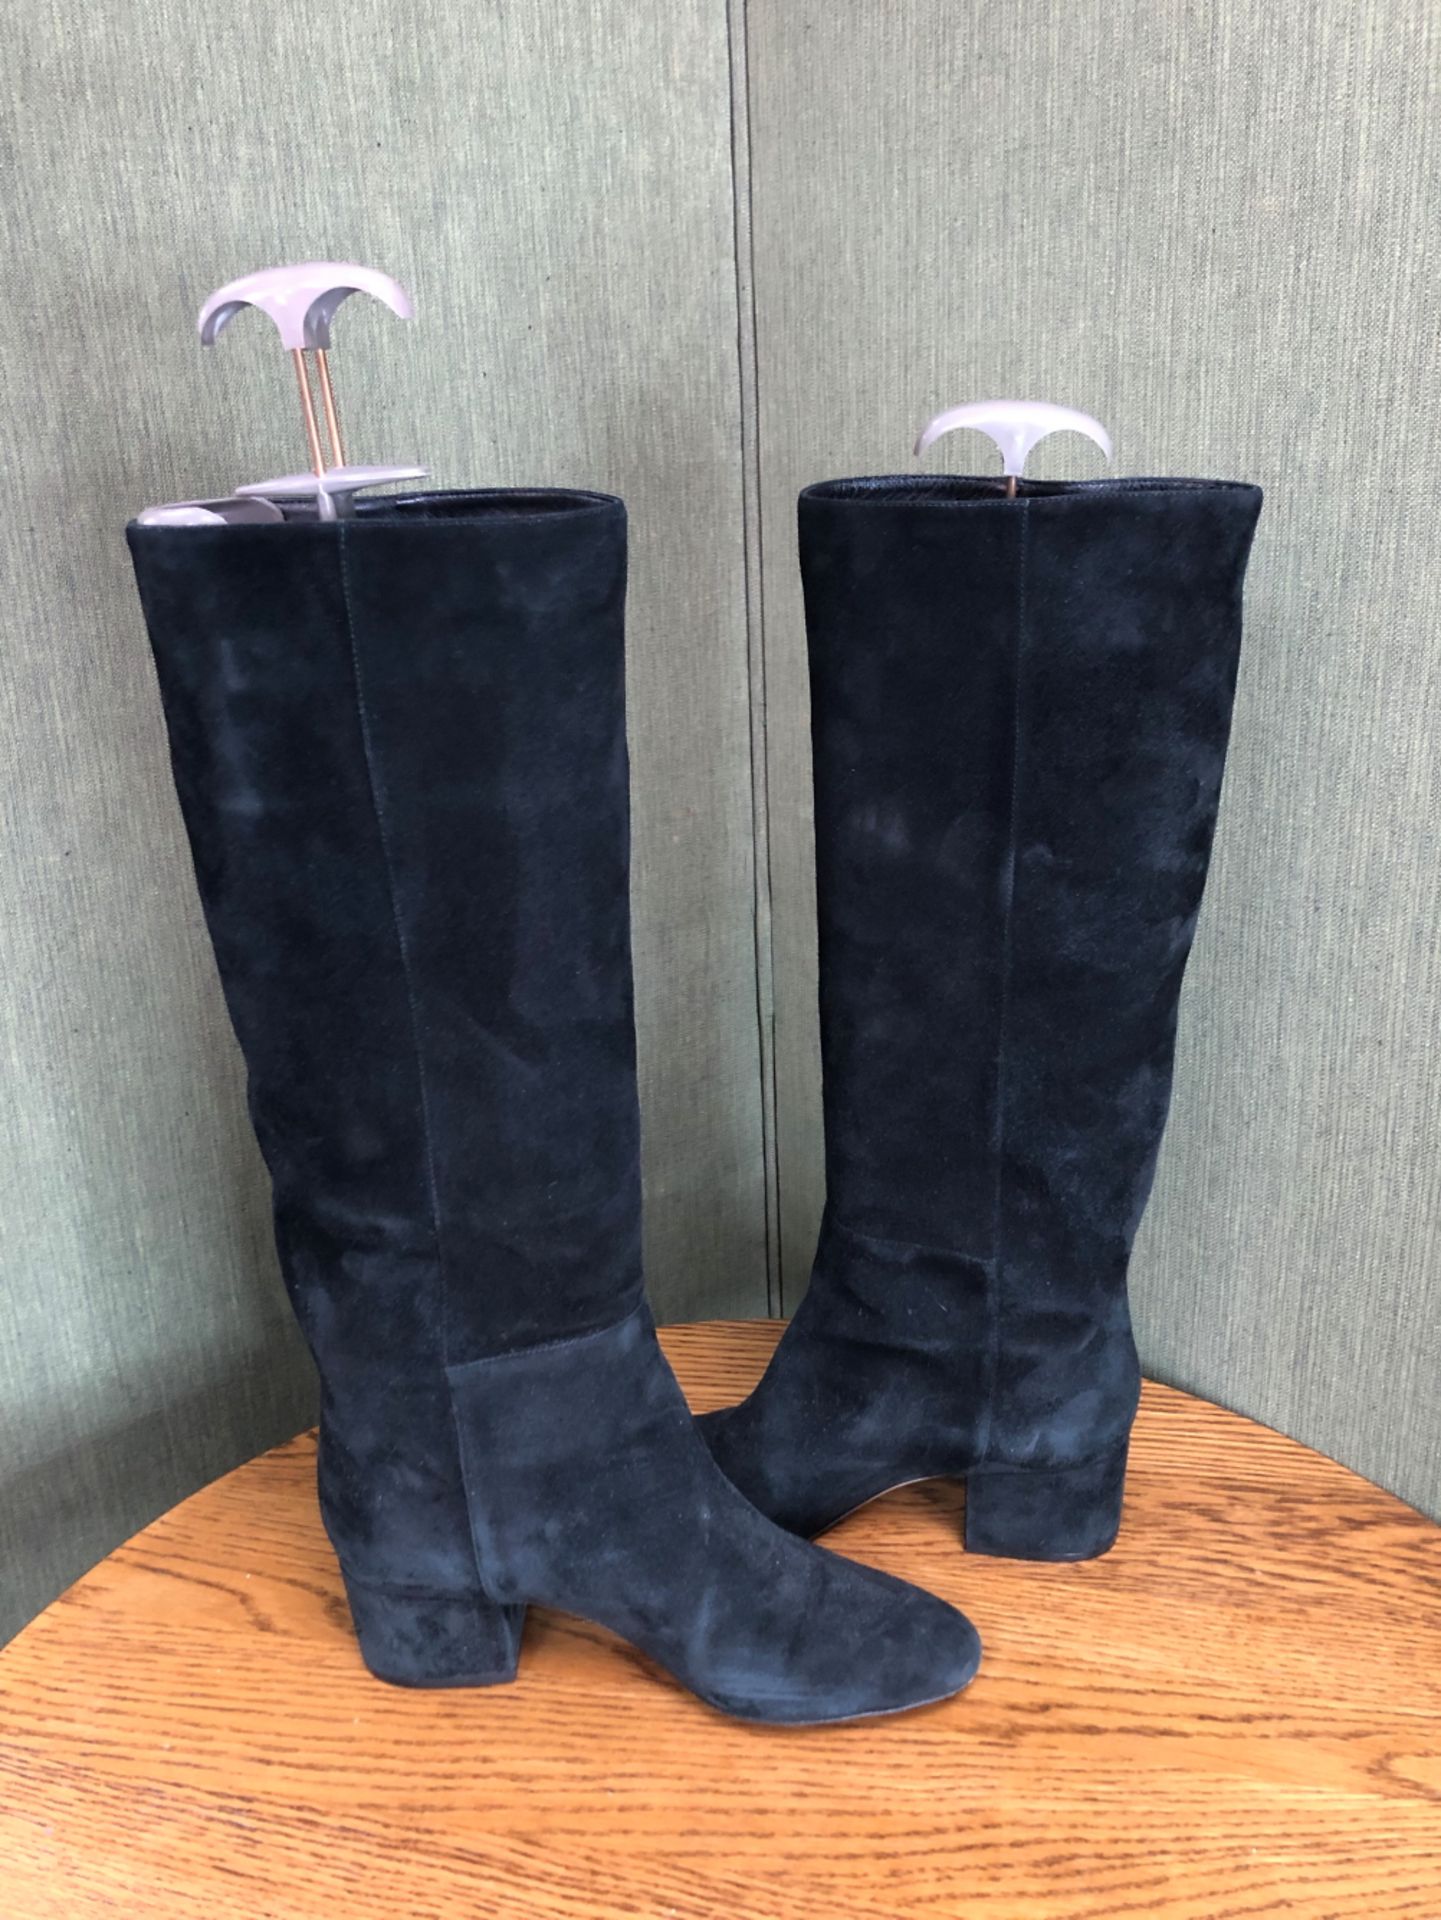 BOOTS: SERGIO ROSSI ITALY BLACK SUEDE KNEE HIGH BOOTS SIZE EUR 39